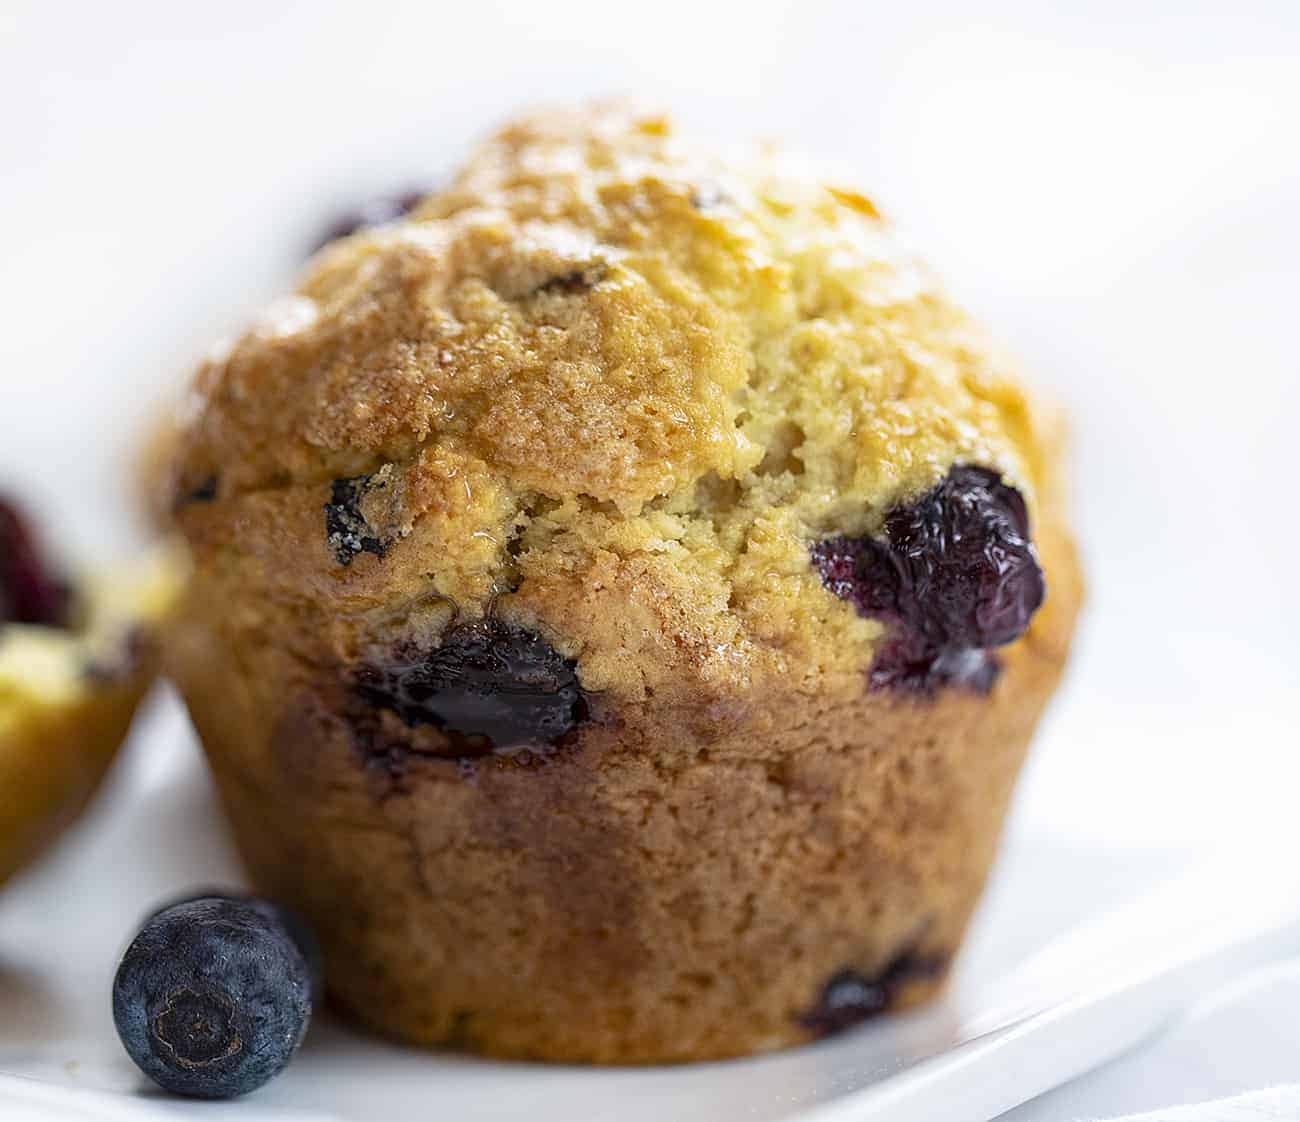 One Sourdough Blueberry Muffin on White Plate with Blueberry Nearby